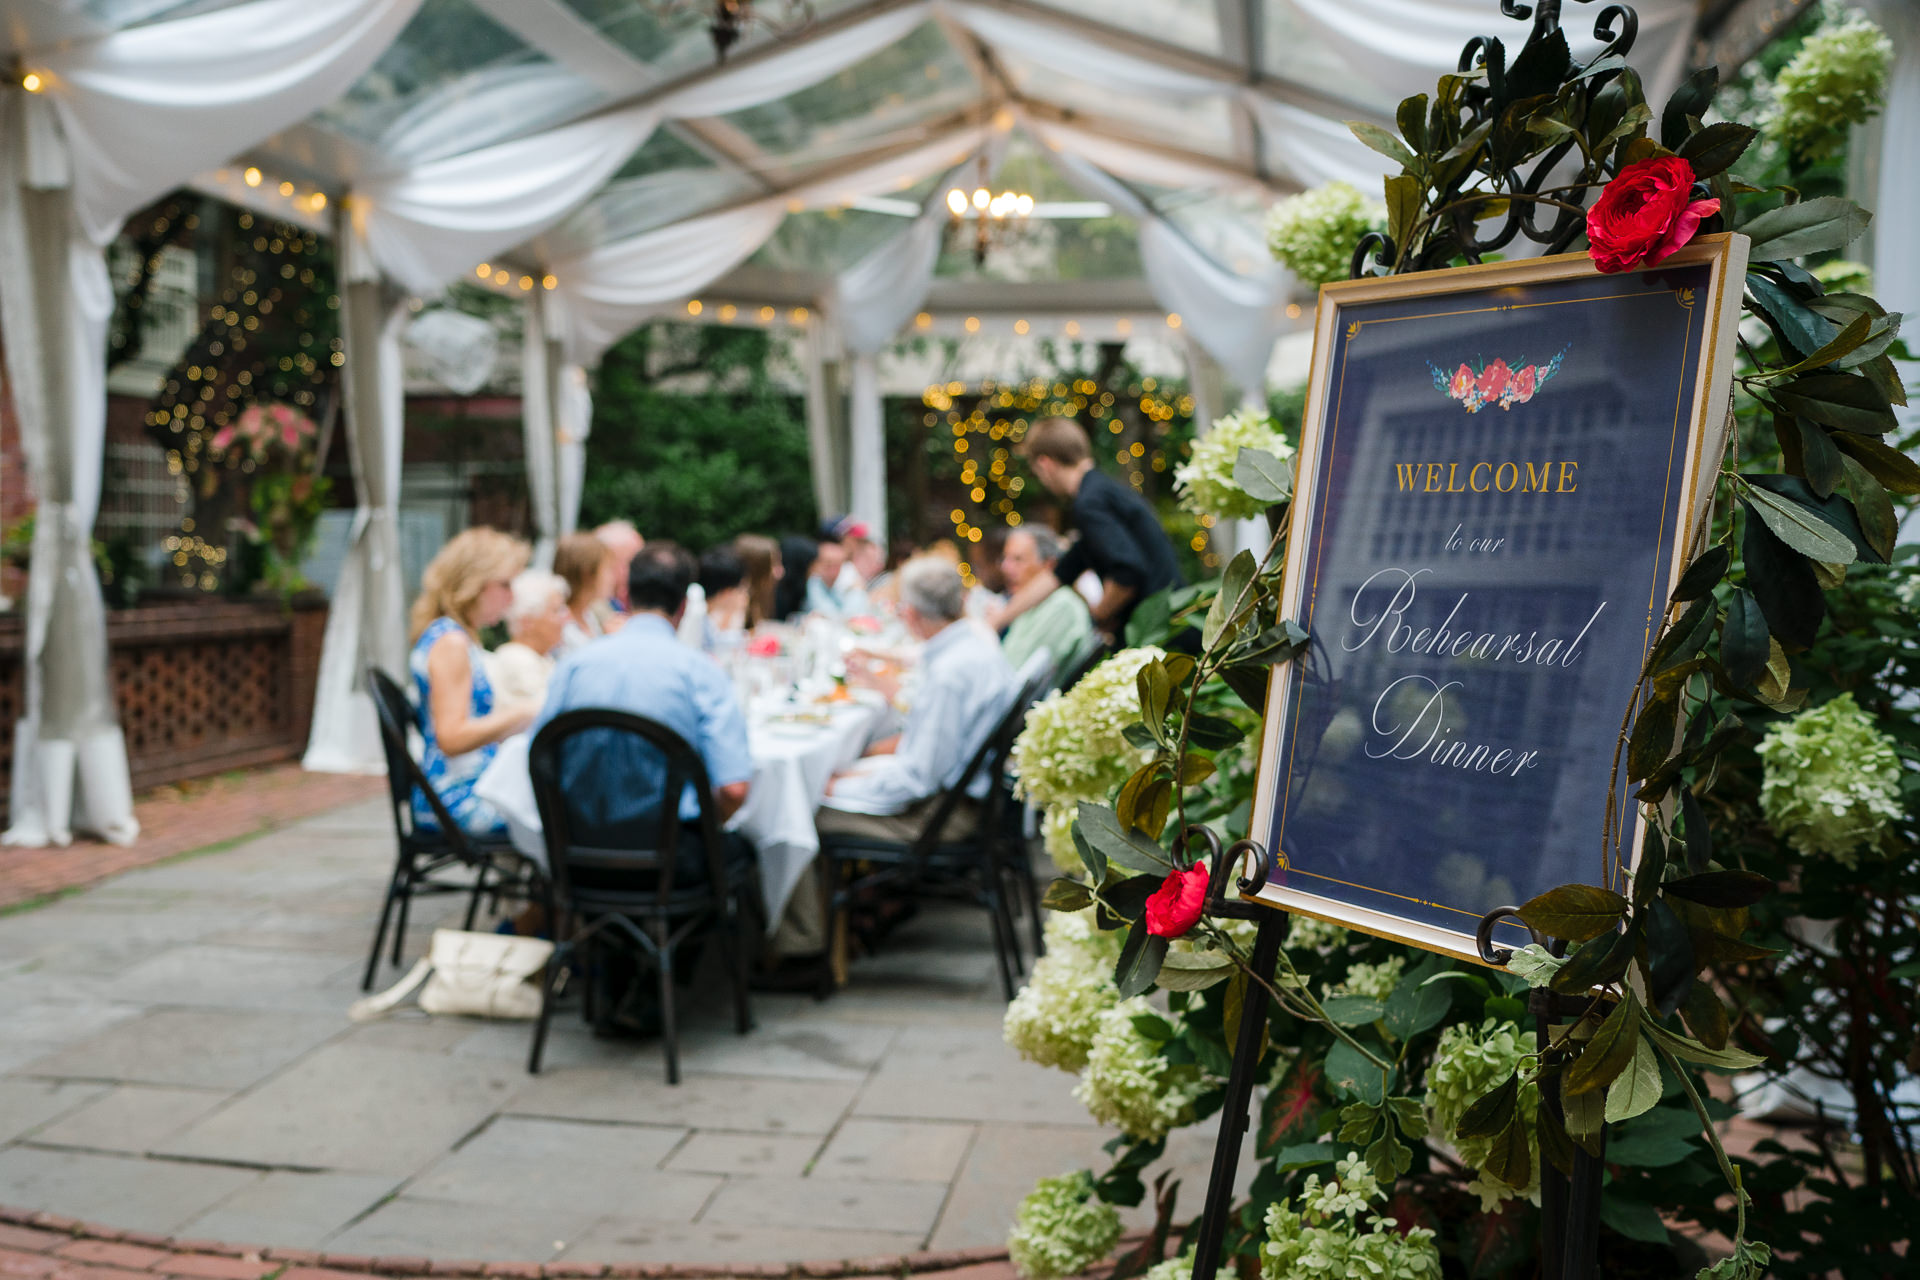 Rehearsal dinner photography coverage at the Morris House Hotel in Philadelphia